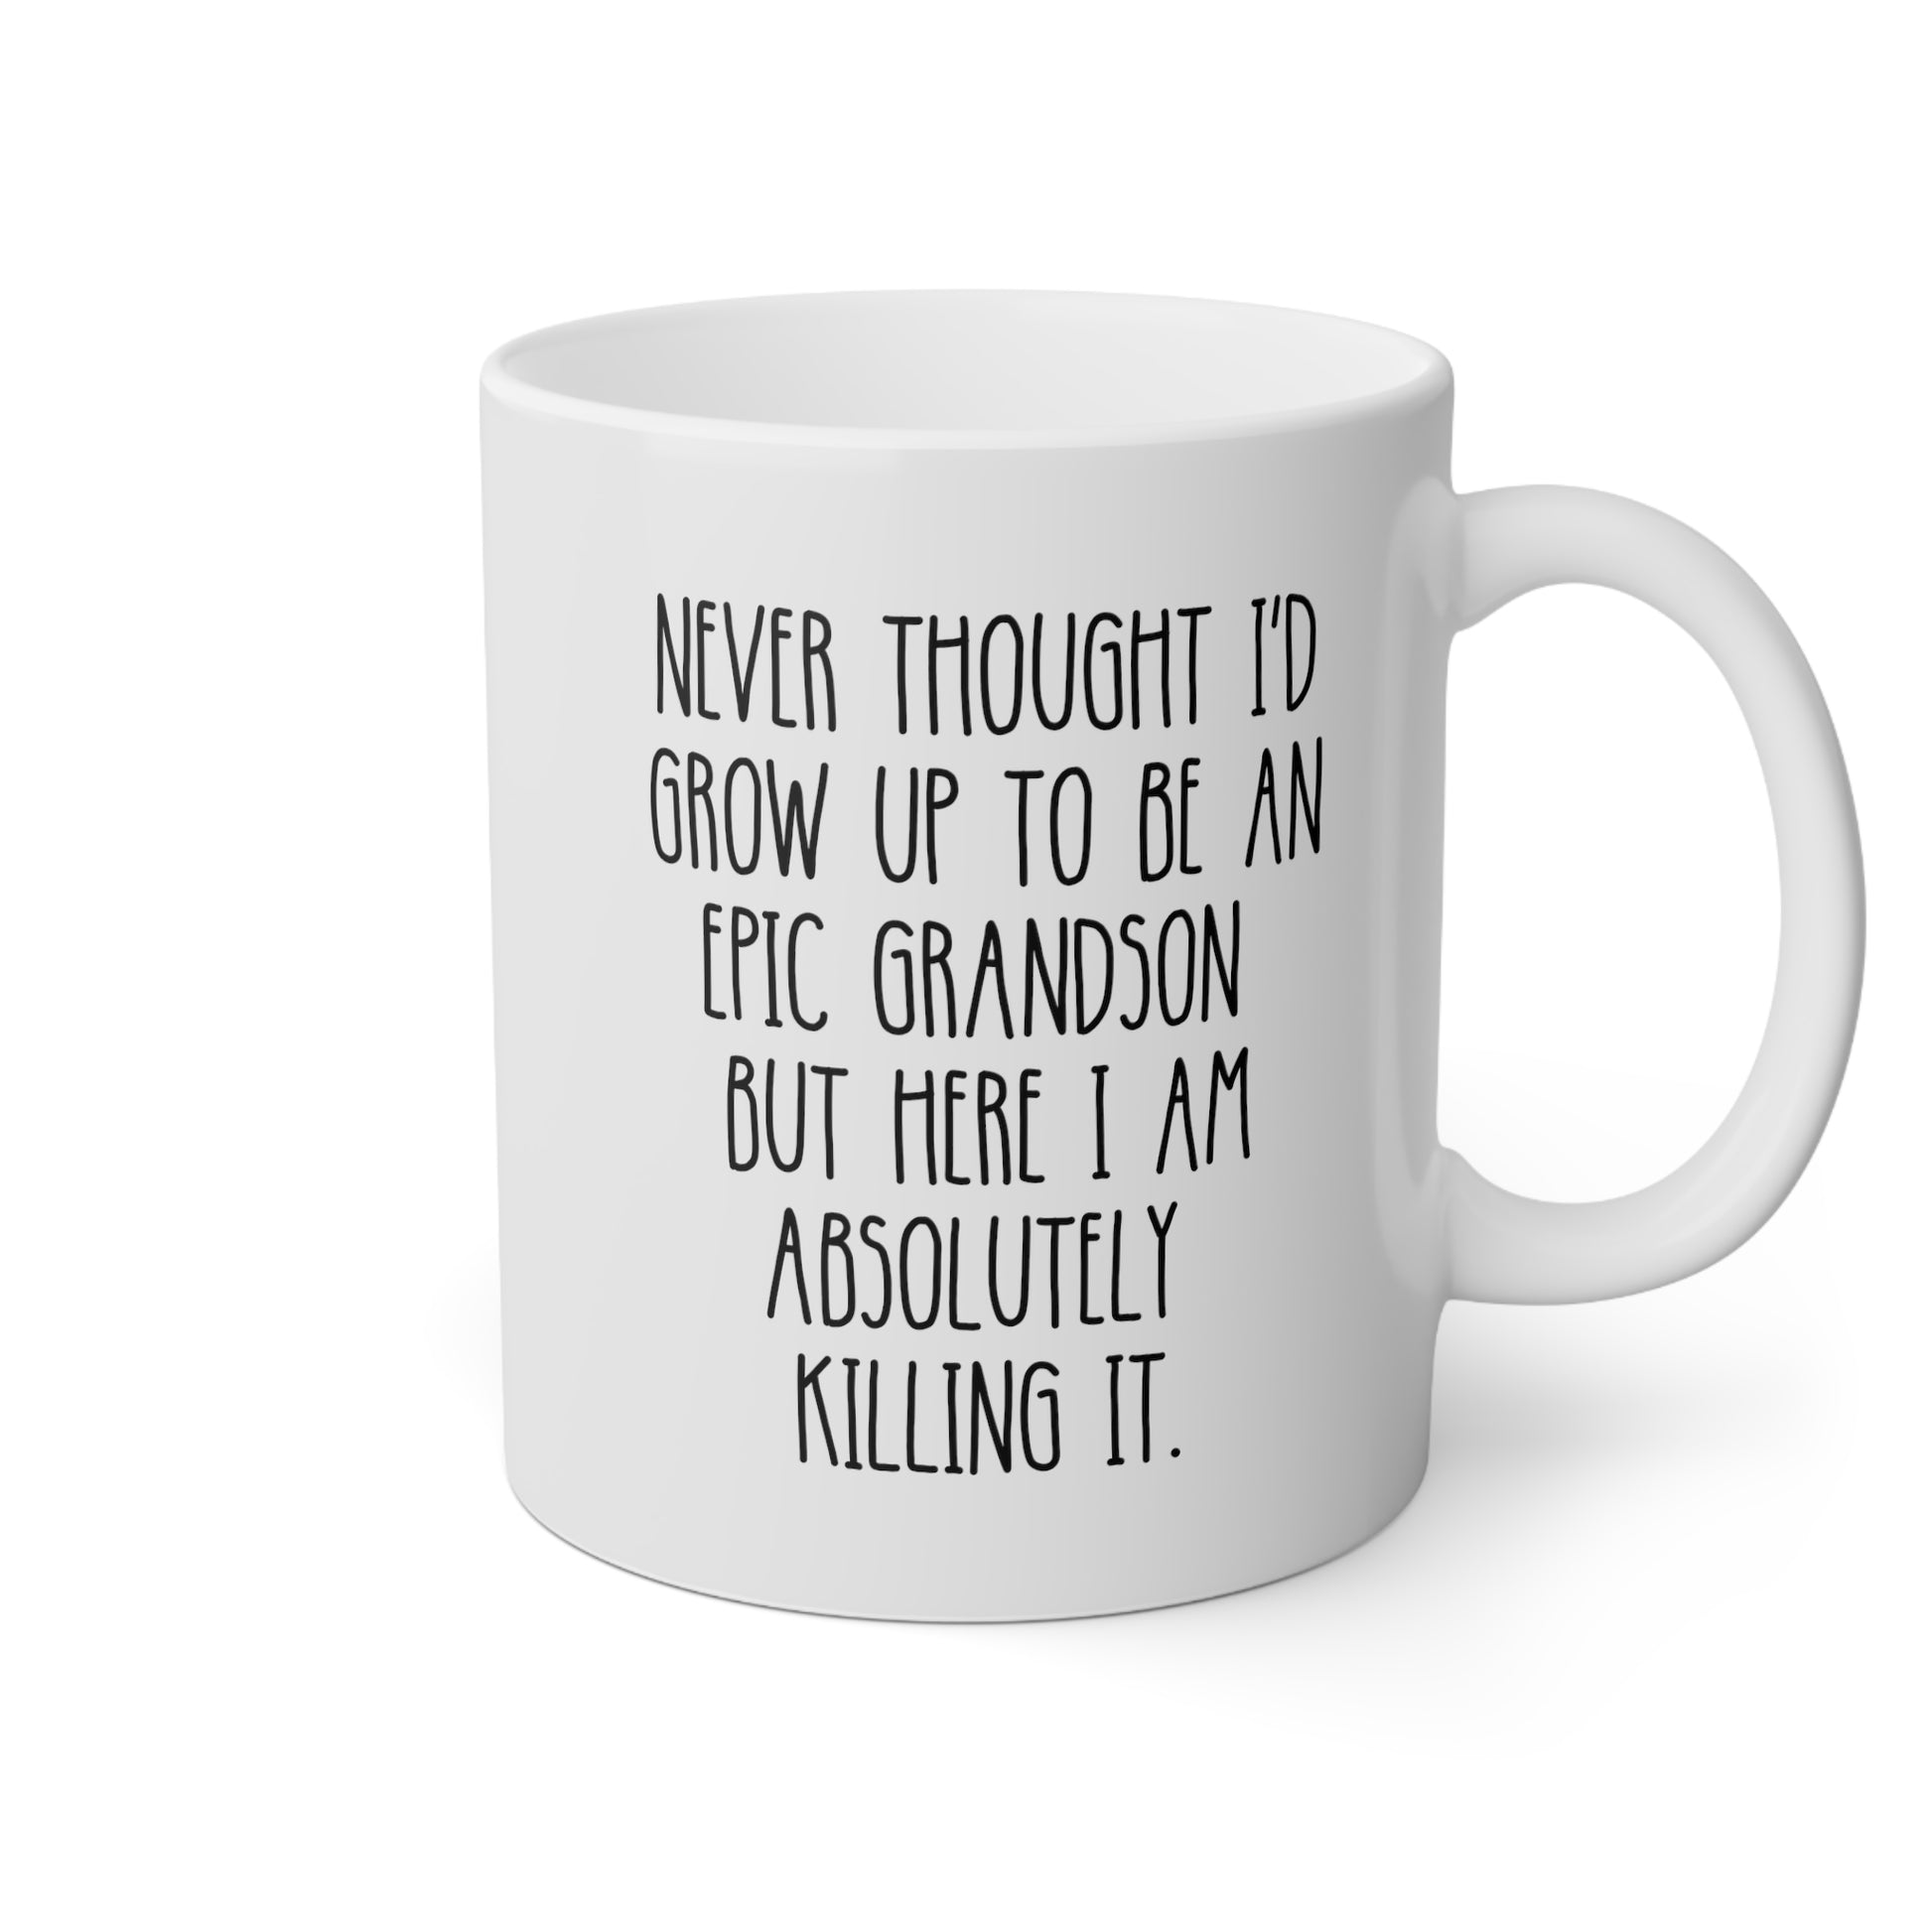 Never Thought I'd Grow Up To Be An Epic Grandson But Here I Am Absolutely Killing It 11oz white funny large coffee mug gift for grandparent waveywares wavey wares wavywares wavy wares